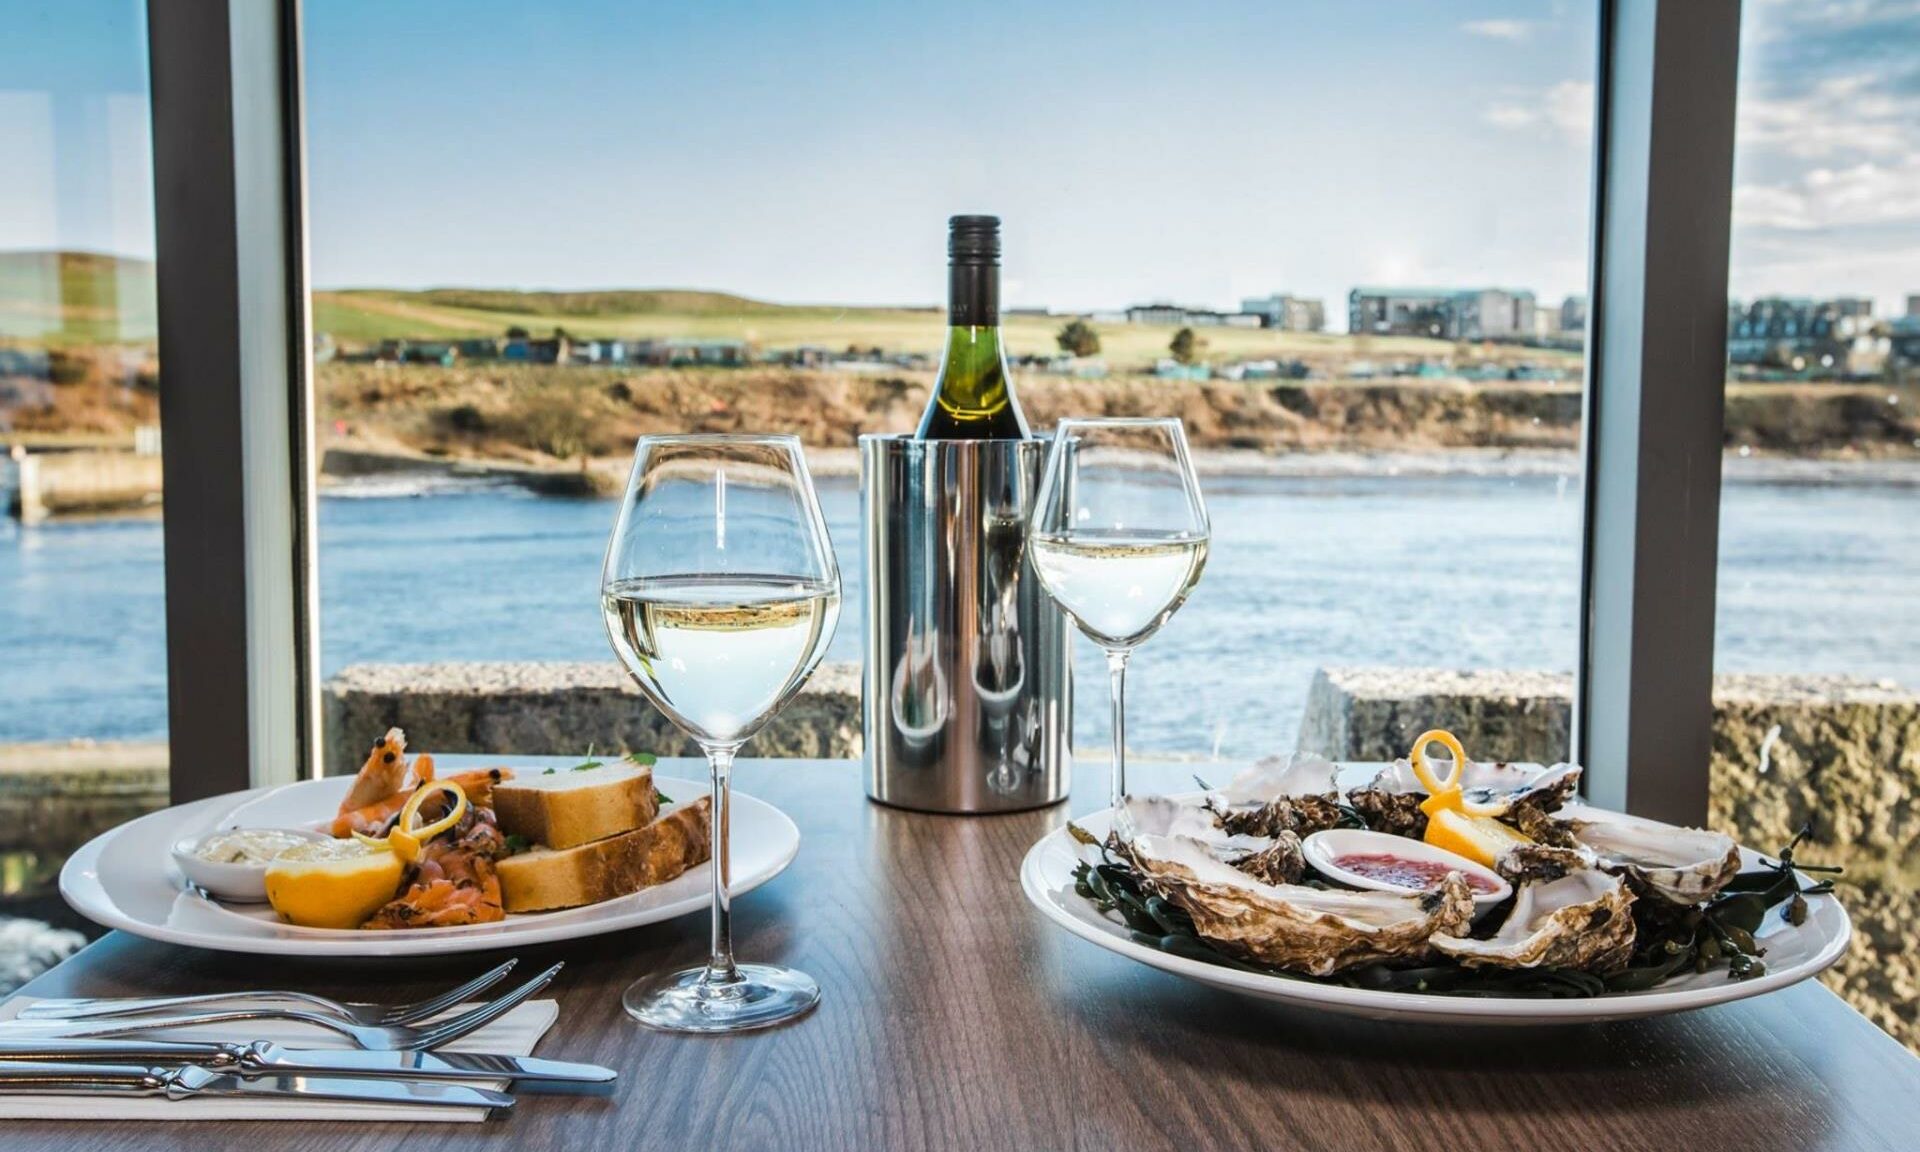 Fresh seafood with views at Aberdeen seaside restaurant The Silver Darling.